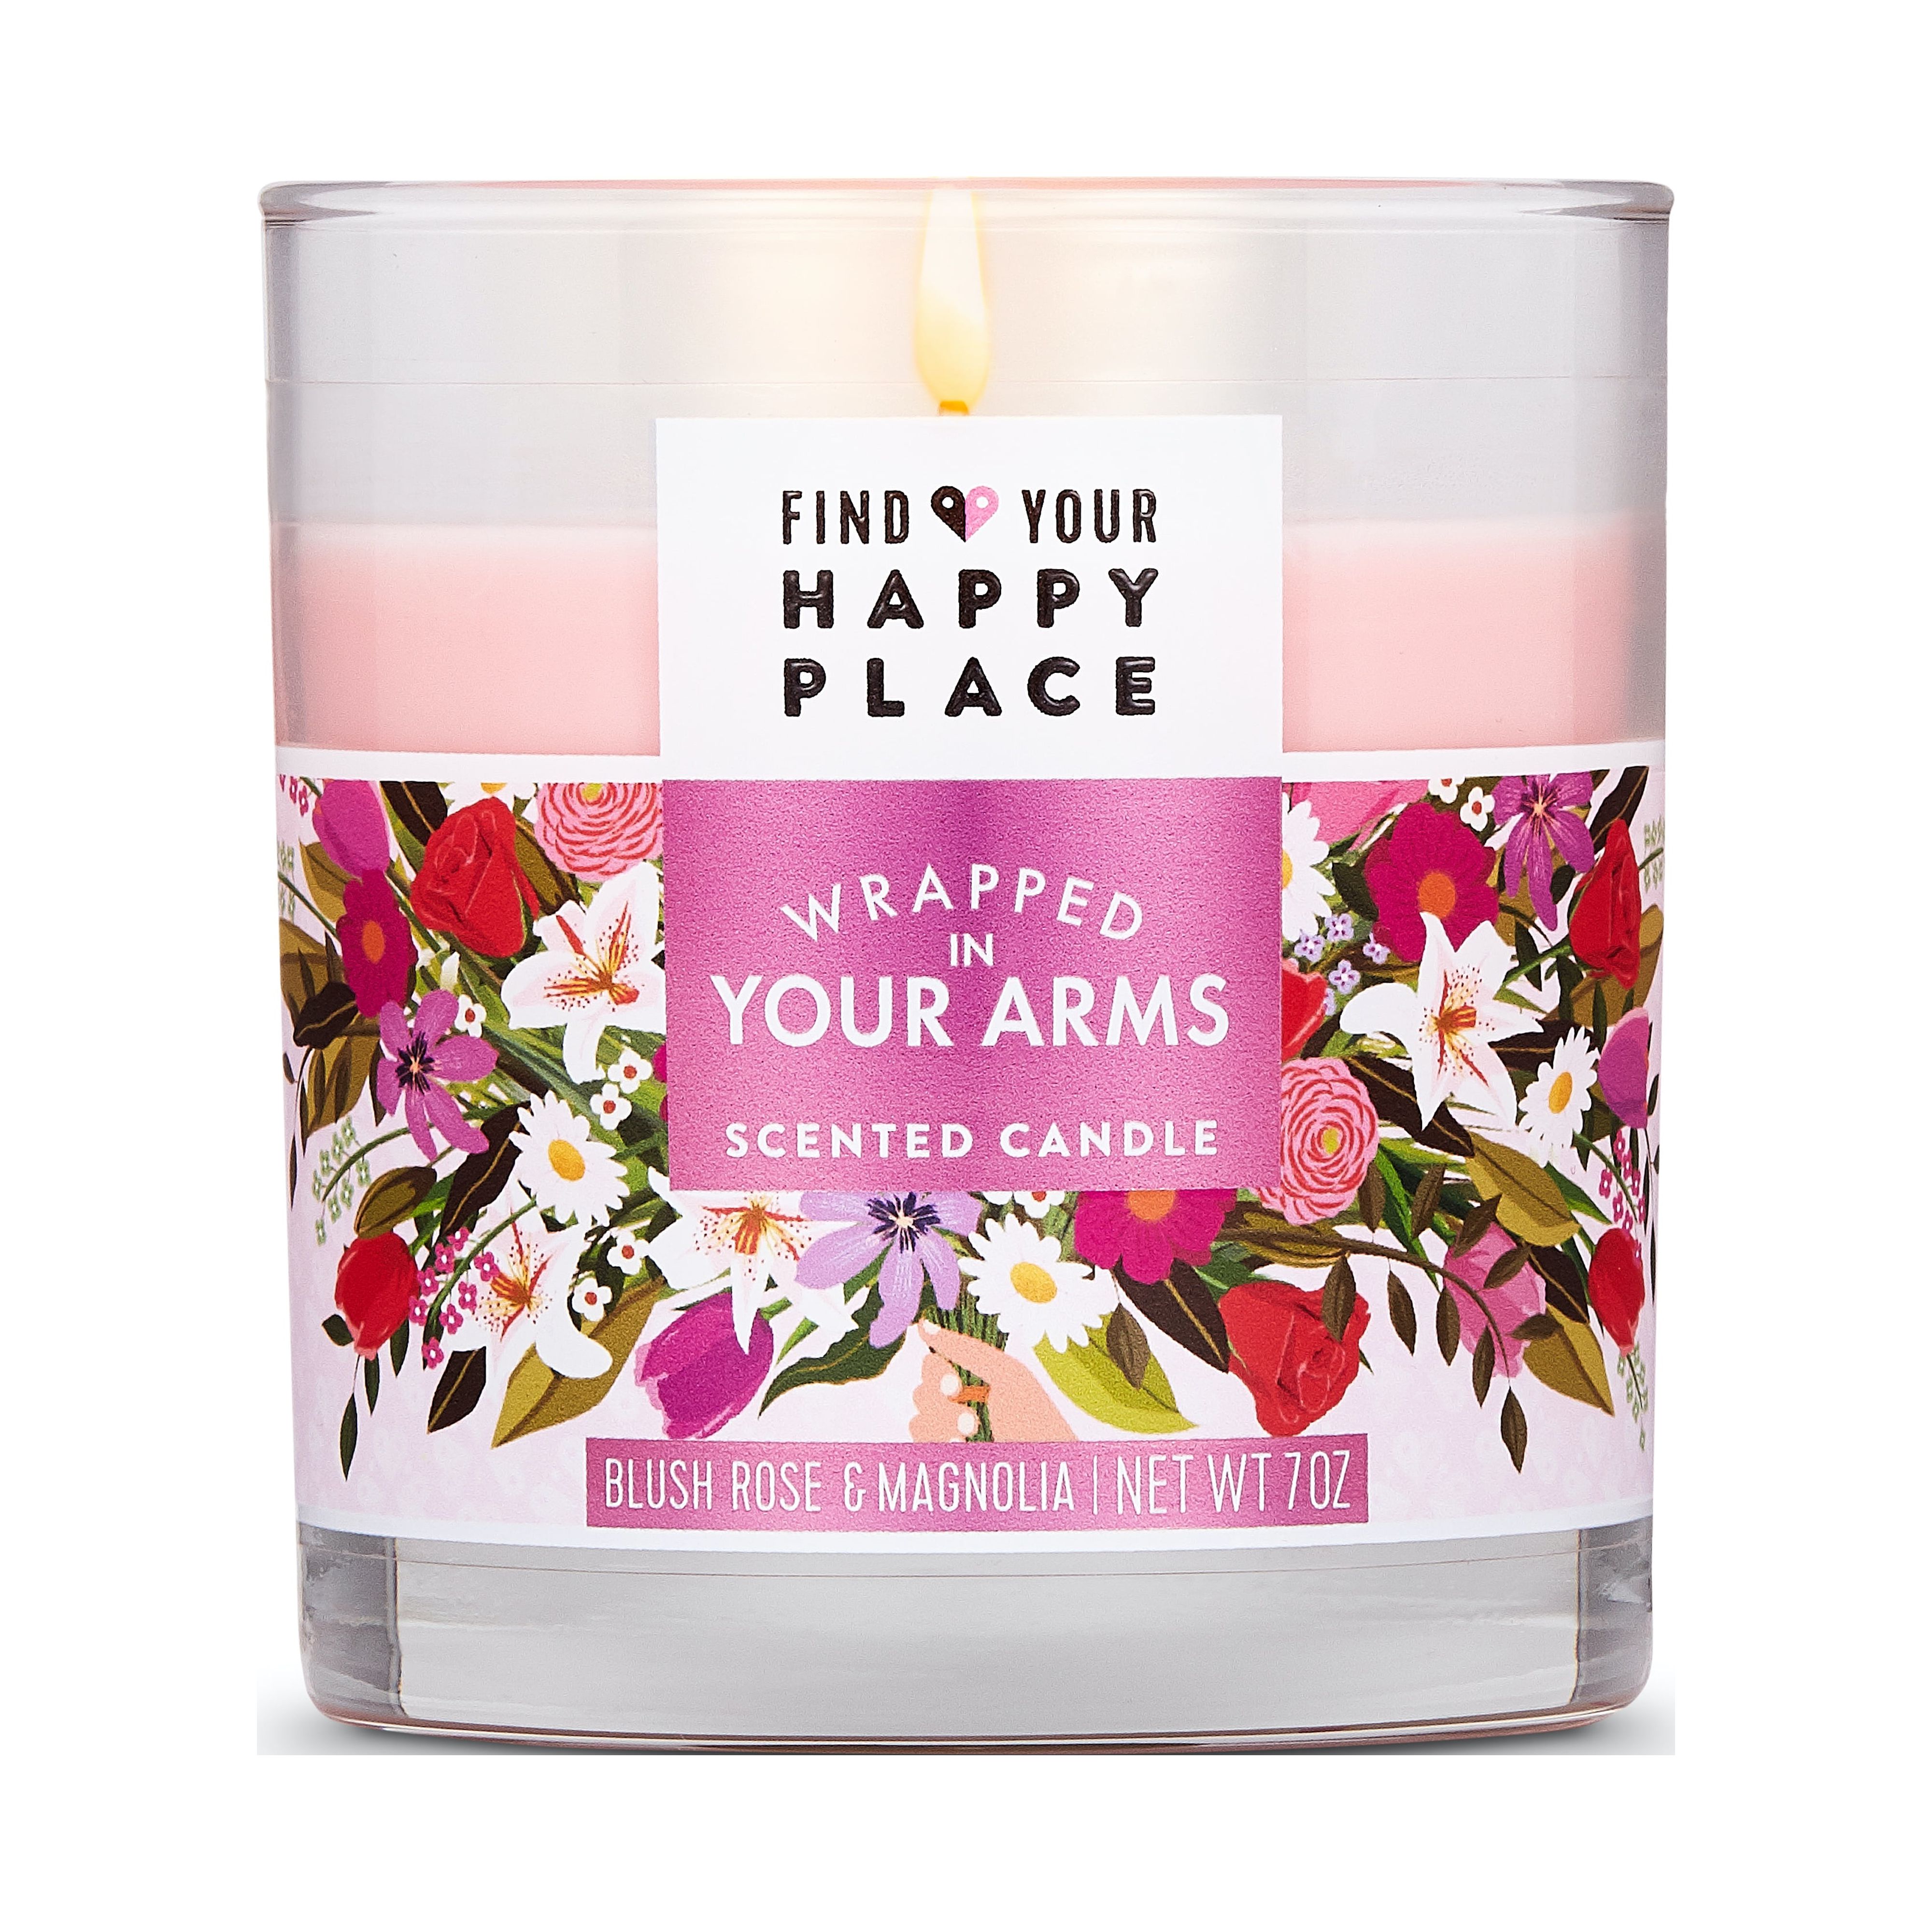 Find Your Happy Place Scented Jar Candle Wrapped In Your Arms Blush Rose and Magnolia,7 oz - image 1 of 9